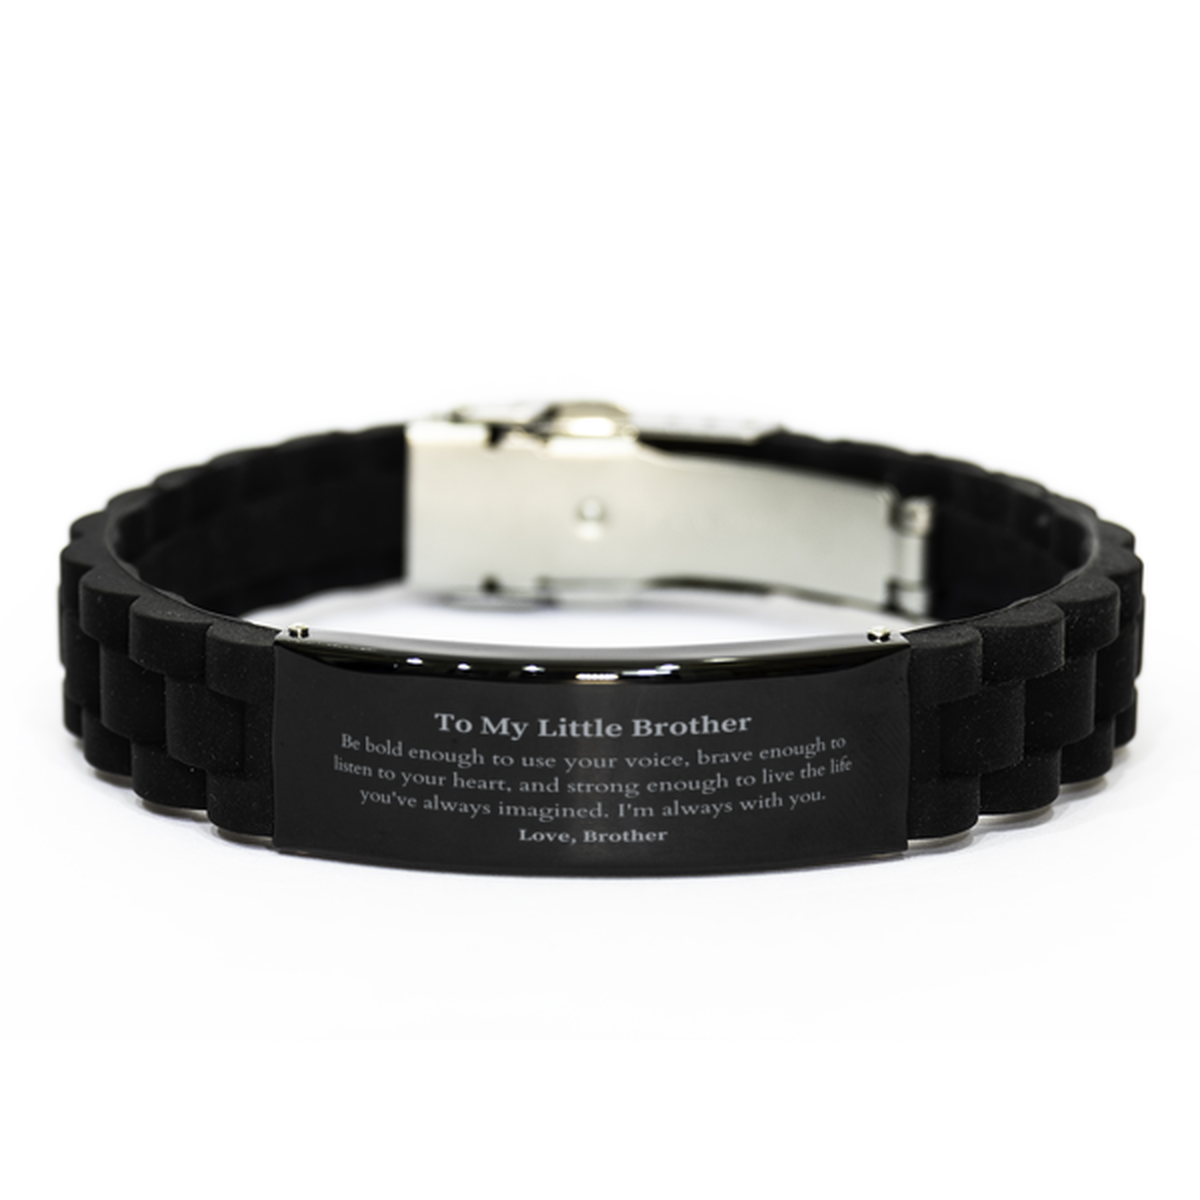 Keepsake Little Brother Black Glidelock Clasp Bracelet Gift Idea Graduation Christmas Birthday Little Brother from Brother, Little Brother Be bold enough to use your voice, brave enough to listen to your heart. Love, Brother